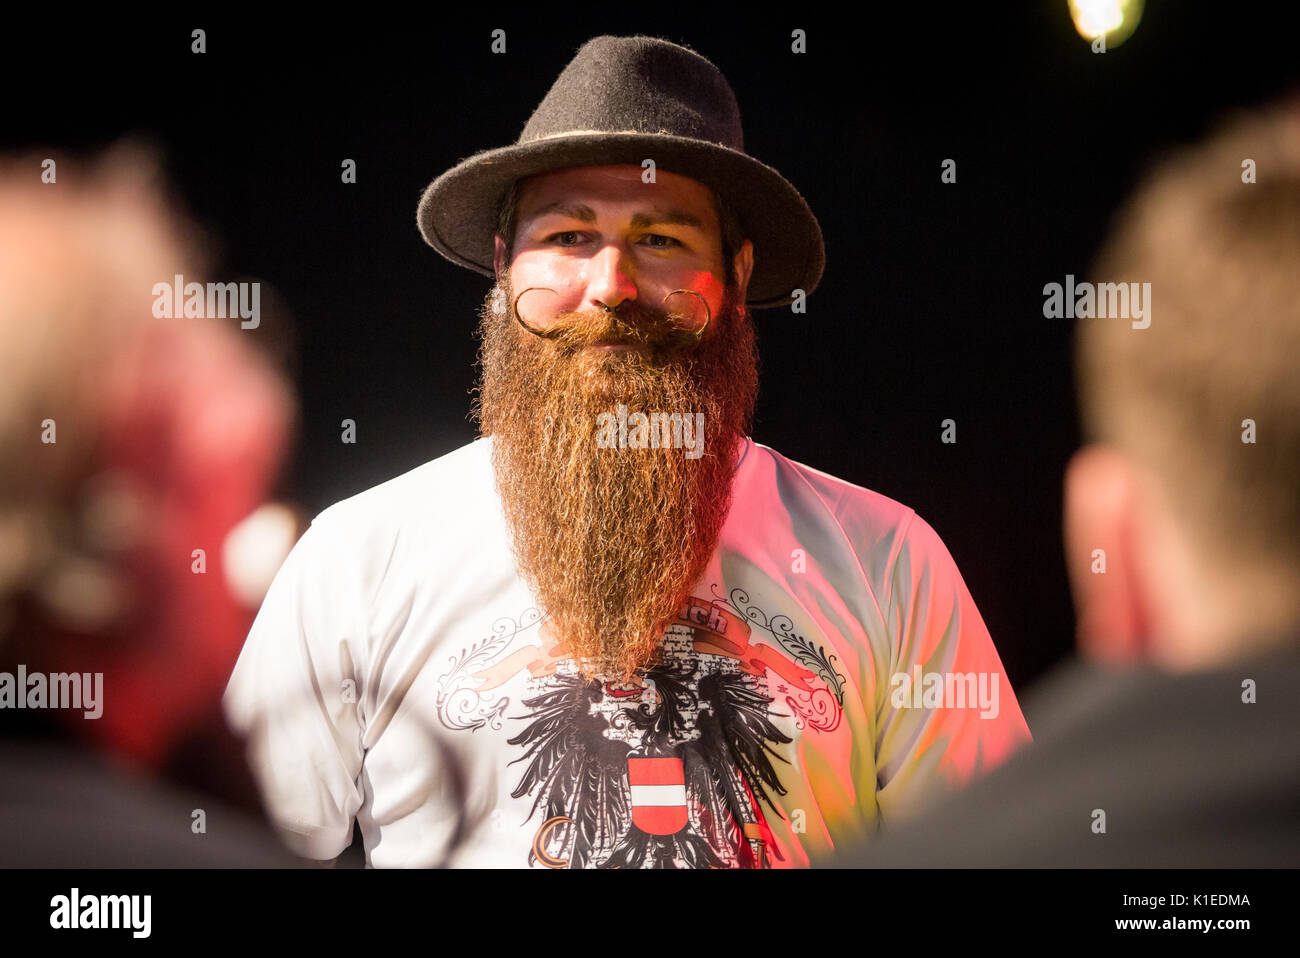 Stuttgart, Germany. 27th Aug, 2017. Marc Bereiter, participant of the Swabian Beard Championships for everyone, presents his beard to the jury during the brewery festival of the brewery 'Stuttgarter Hofbräu' in Stuttgart, Germany, 27 August 2017. Shortly thereafter, Bereiter won the championship. Photo: Christoph Schmidt/dpa/Alamy Live News Stock Photo